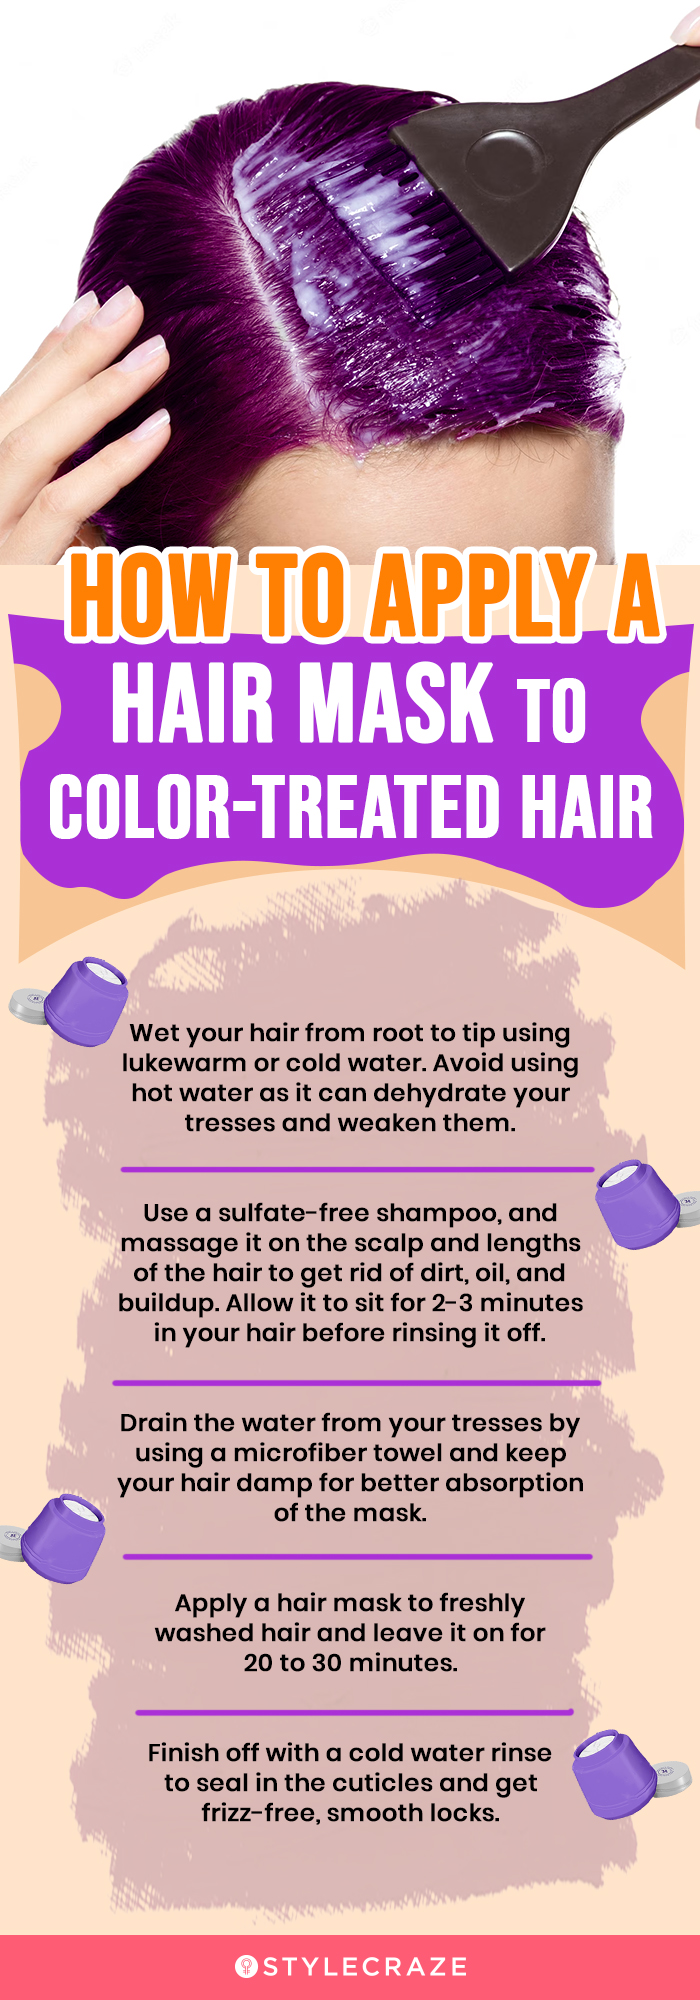 How To Apply A Hair Mask To Color-Treated Hair (infographic)